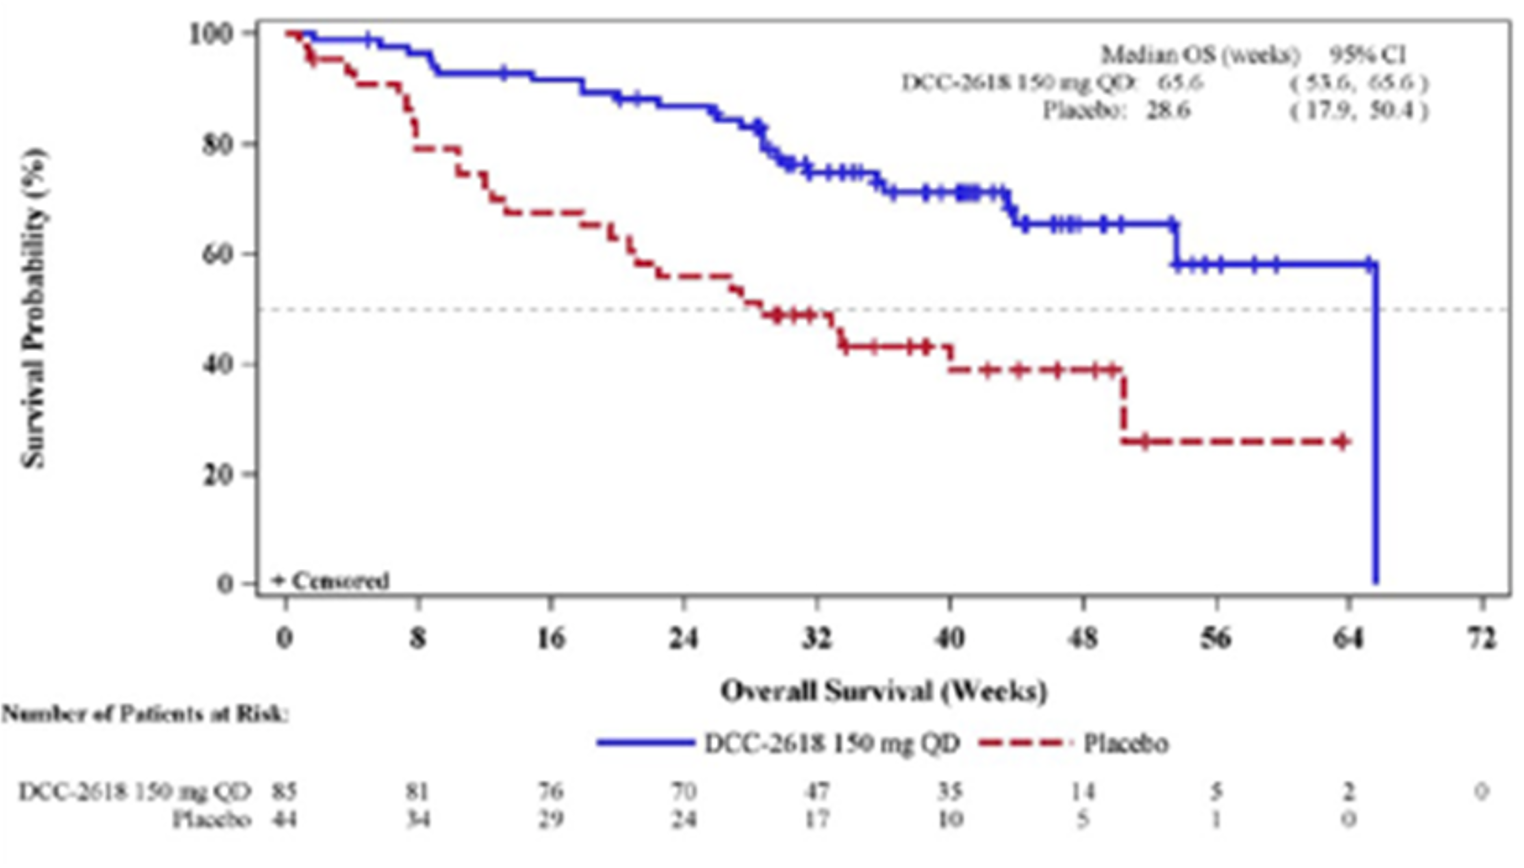 In this Kaplan-Meier analysis of OS among the ITT population during the DB period of the INVICTUS trial as of the May 31, 2019, database lock, patients randomized to receive placebo had OS probabilities of approximately 75% at 10 weeks, approximately 50% at 28 weeks, and approximately 25% at 50 weeks. By contrast, patients randomized to receive ripretinib 150 mg once daily during the DB period had OS probabilities of approximately 75% at 31 weeks and approximately 60% at the end of the observation period at 65 weeks. Median OS was 65.6 (95% CI, 53.6 to 65.6) weeks among patients randomized to receive ripretinib 150 mg once daily during the DB period and 28.6 (95% CI, 17.9 to 50.4) weeks among patients randomized to receive placebo during the DB period. The number of at-risk patients randomized to receive ripretinib 150 mg once daily during the DB period at 0, 8, 16, 24, 32, 40, 48, 56, and 64 weeks was 85, 81, 76, 70, 47, 35, 14, 5, 2, and 0, respectively. The number of at-risk patients randomized to receive placebo during the DB period at 0, 8, 16, 24, 32, 40, 48, 56, and 64 weeks was 44, 34, 29, 24, 17, 10, 5, 1, and 0, respectively.